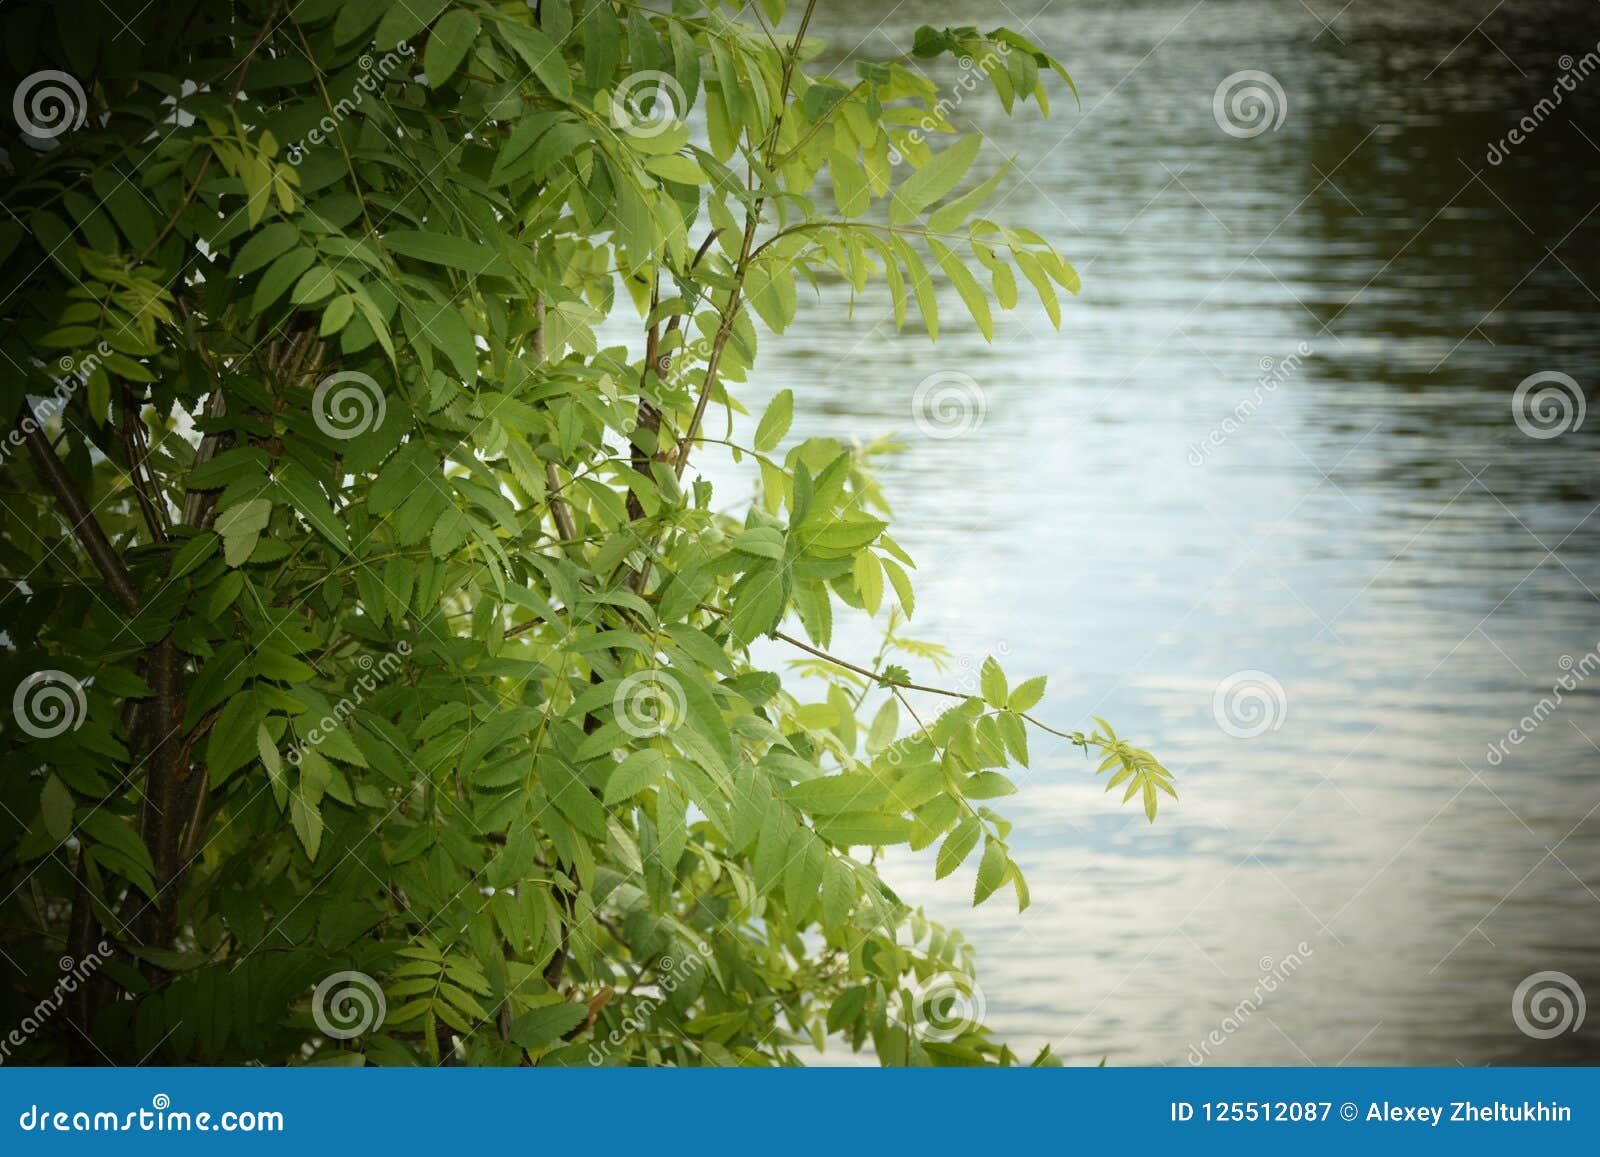 The Rowan Branch Bent Over the Water. Stock Image - Image of shallow ...